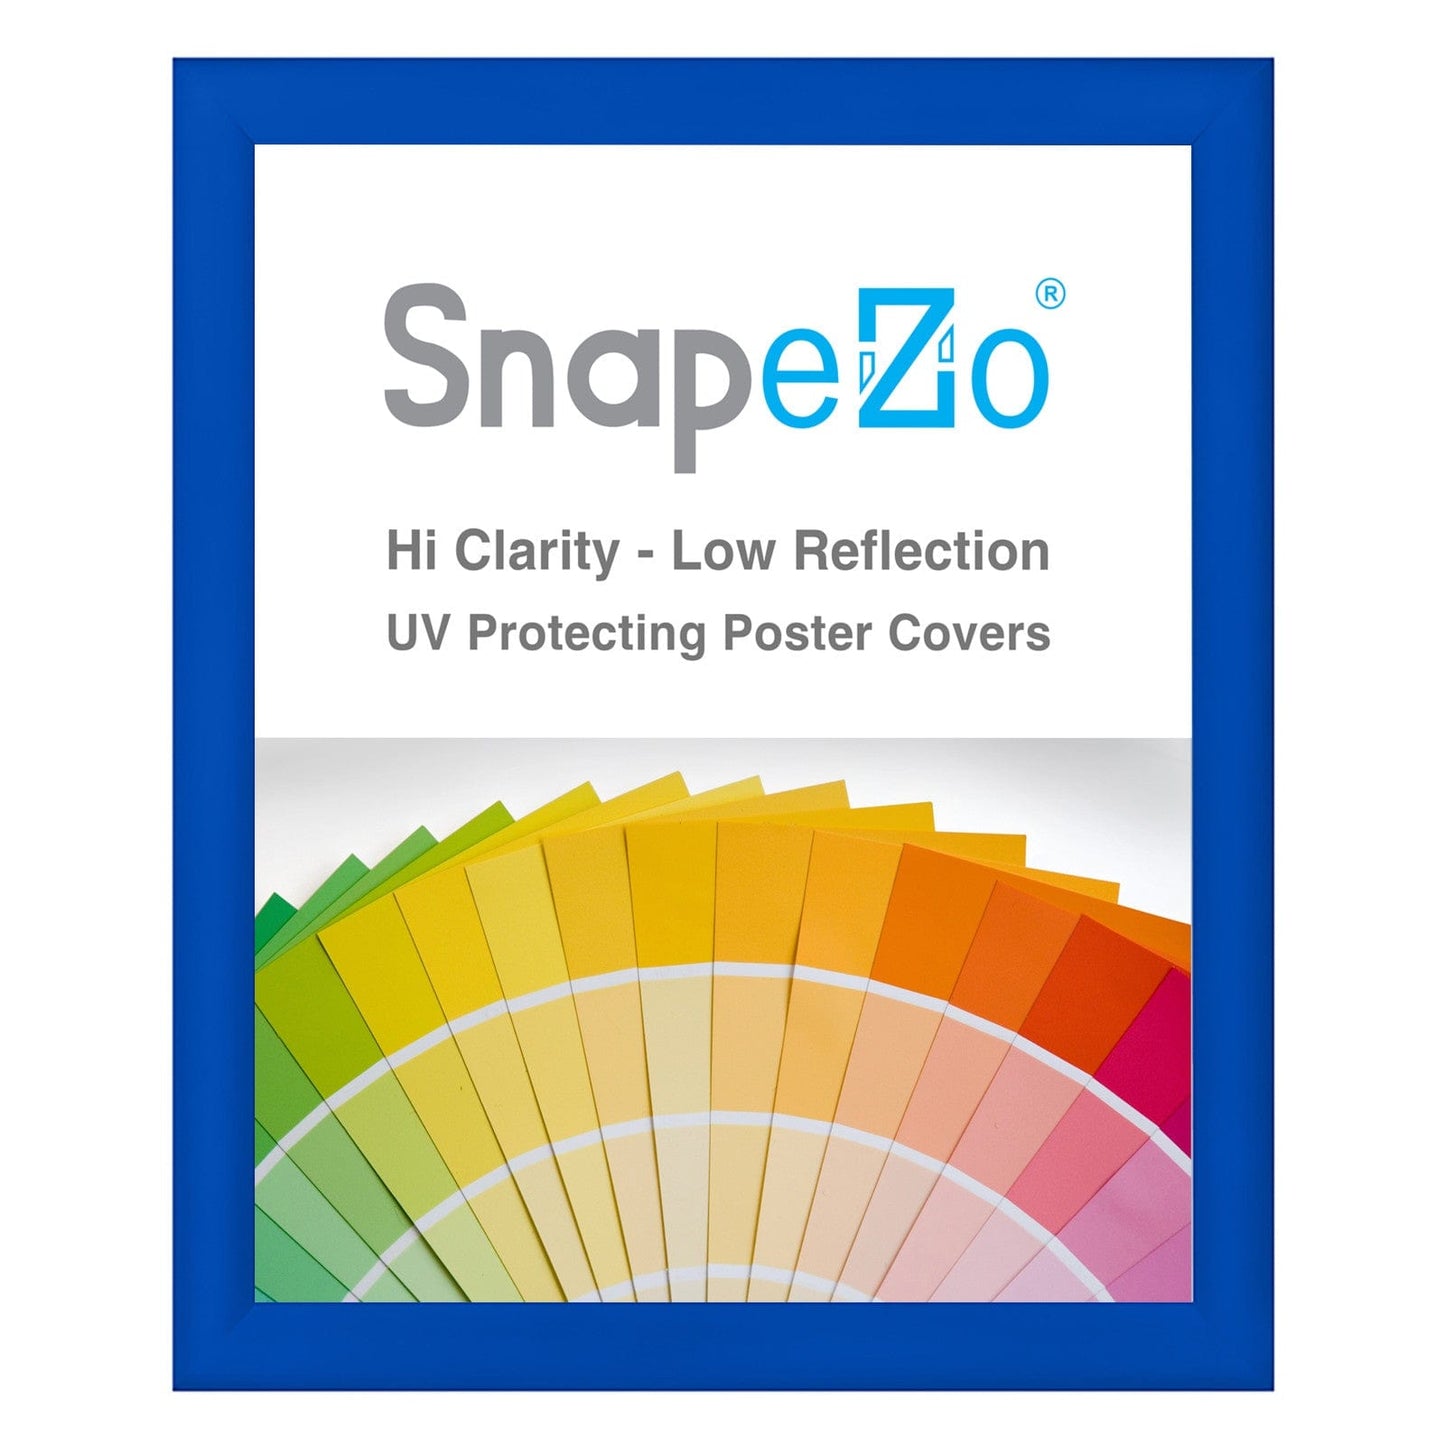 25x31 Blue SnapeZo® Snap Frame - 1.2" Profile - Snap Frames Direct